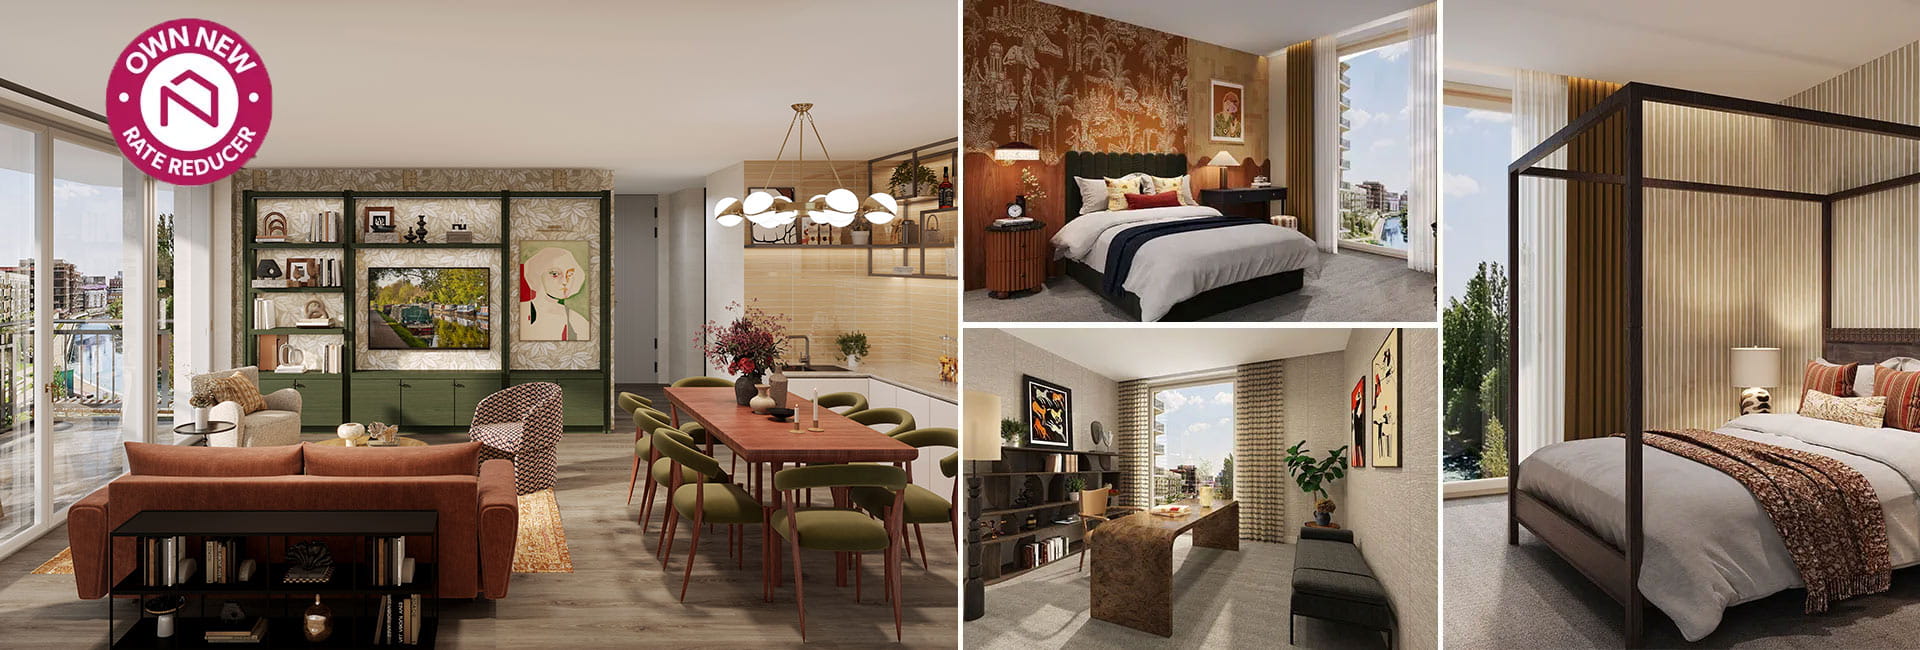 A montage of interior CGI images at Grand Union